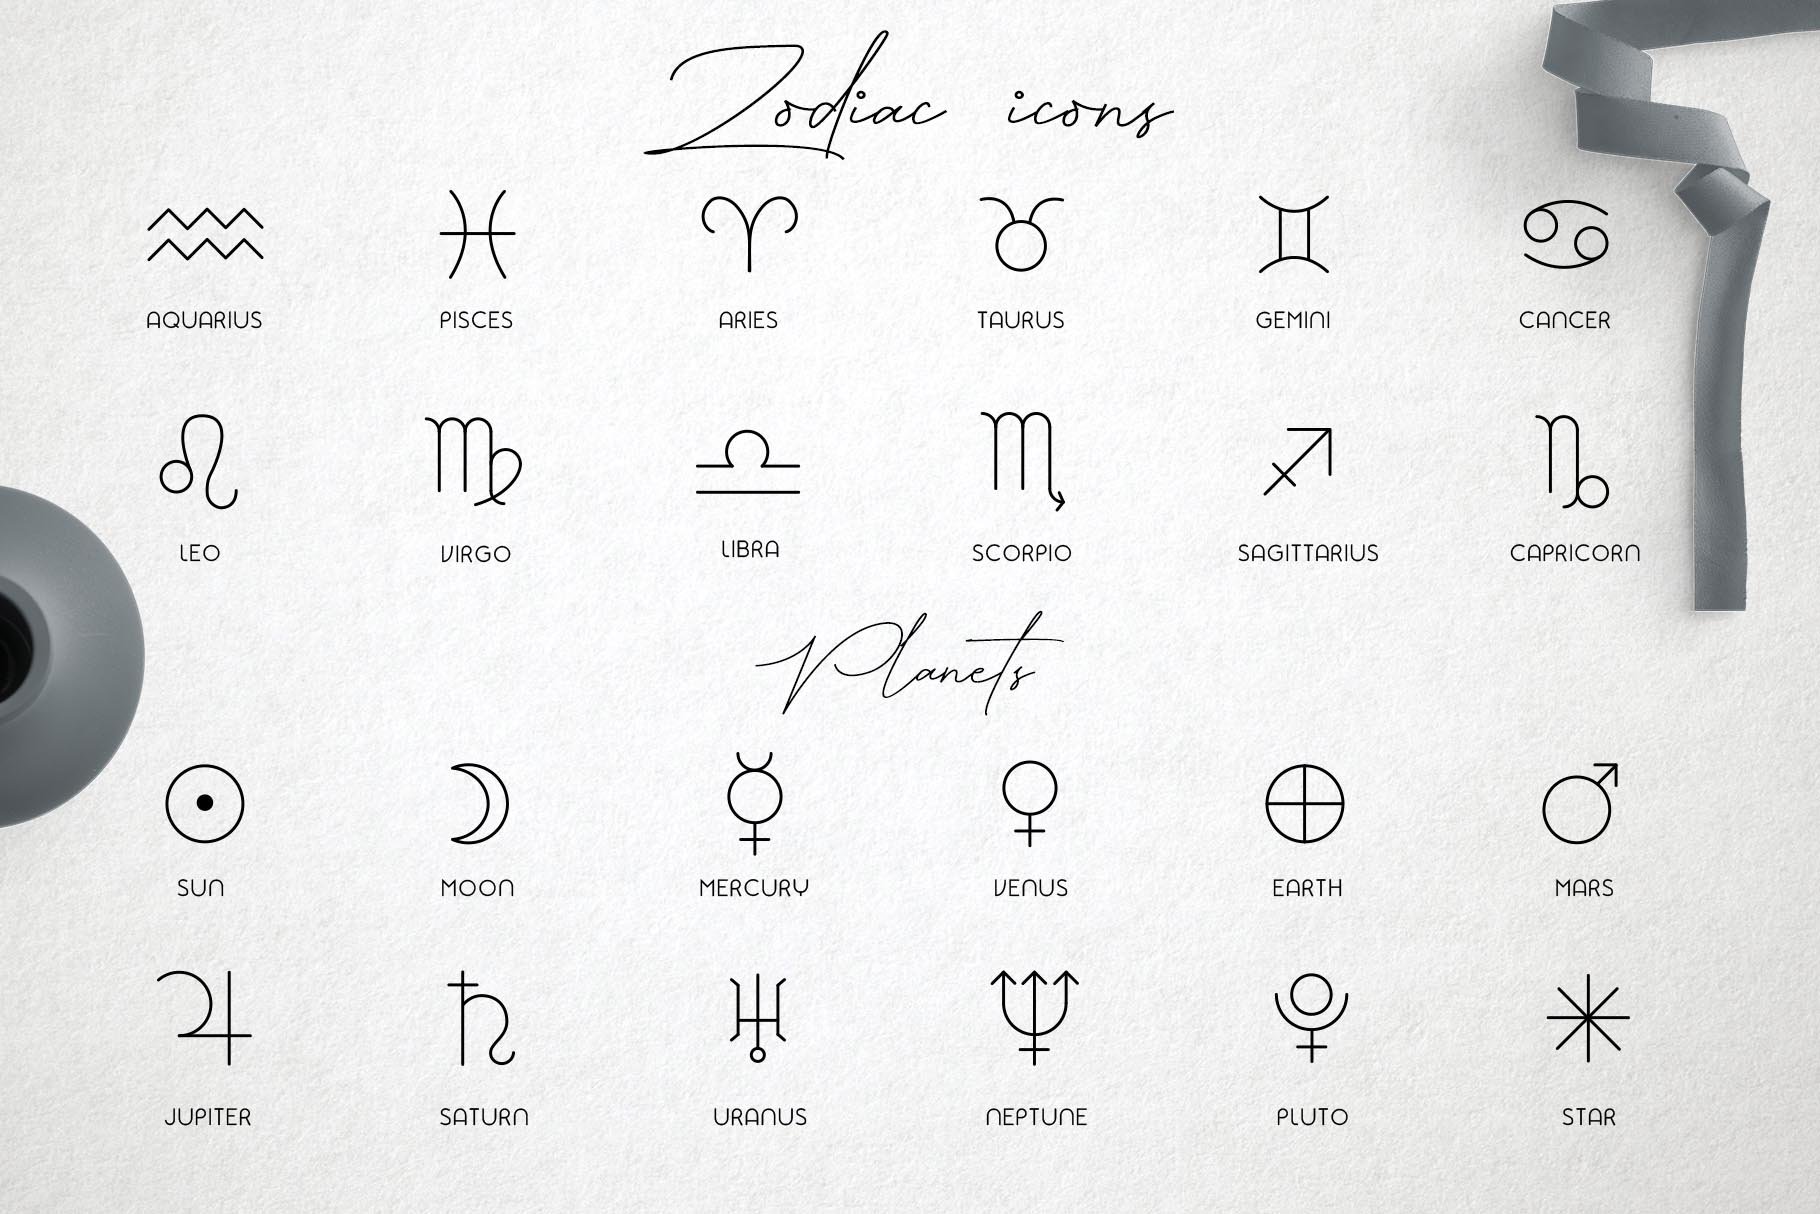 Some laconic zodiac icons and planets for your illustration.